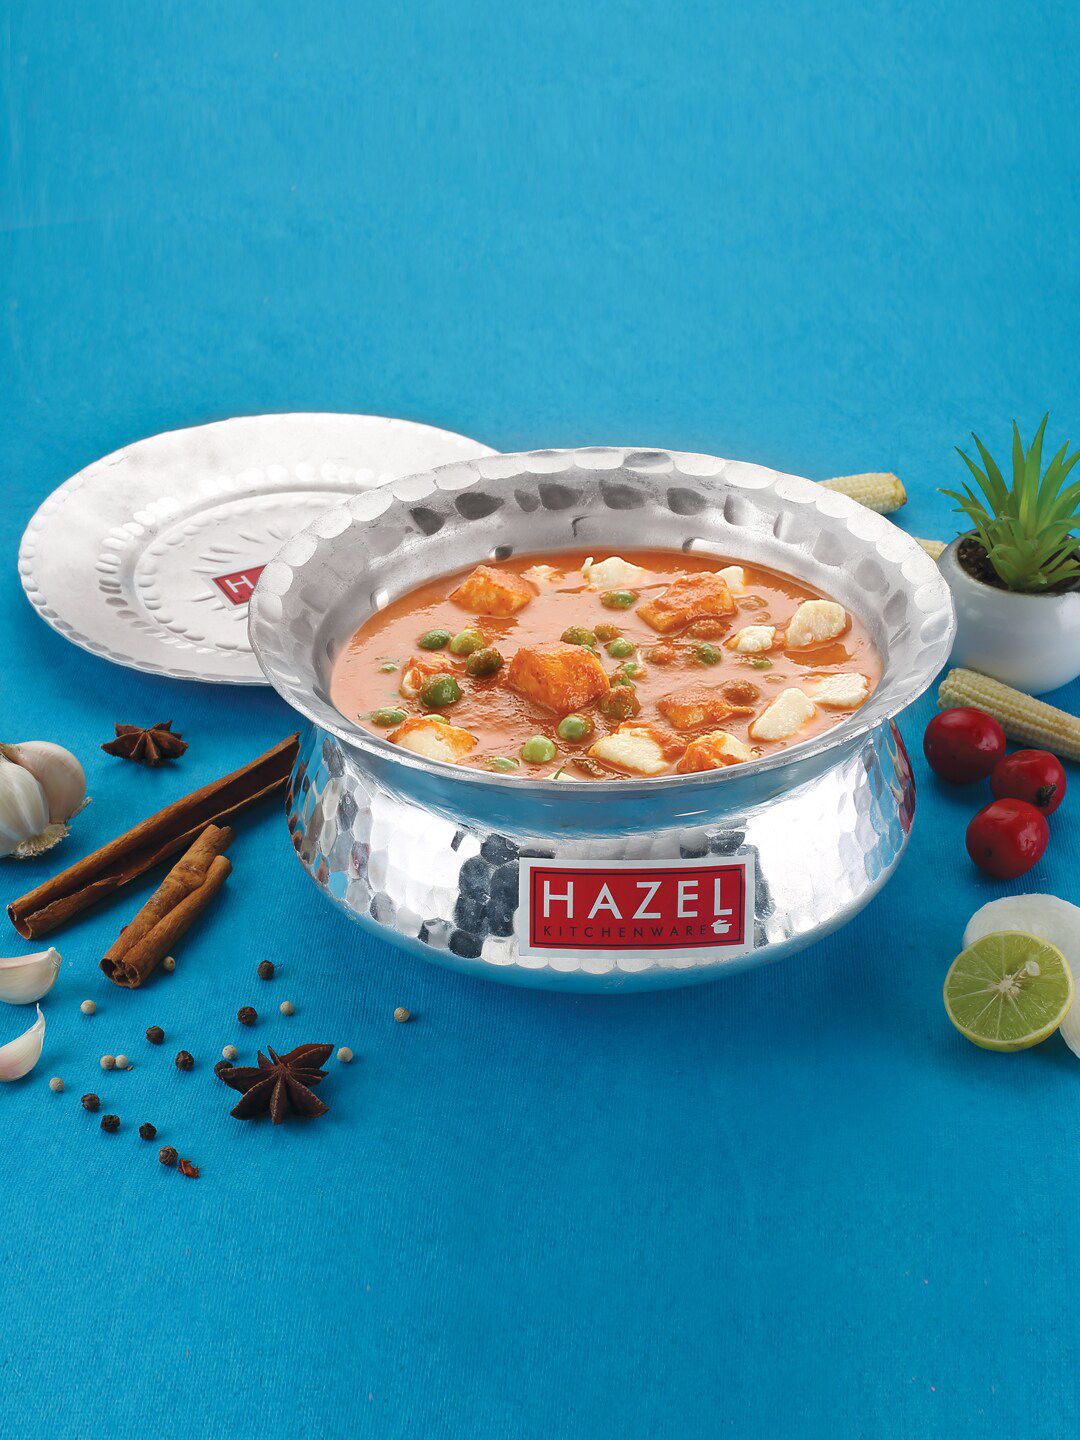 HAZEL Silver-Toned Hammered Handi Pot With Lid 2900 Ml Price in India